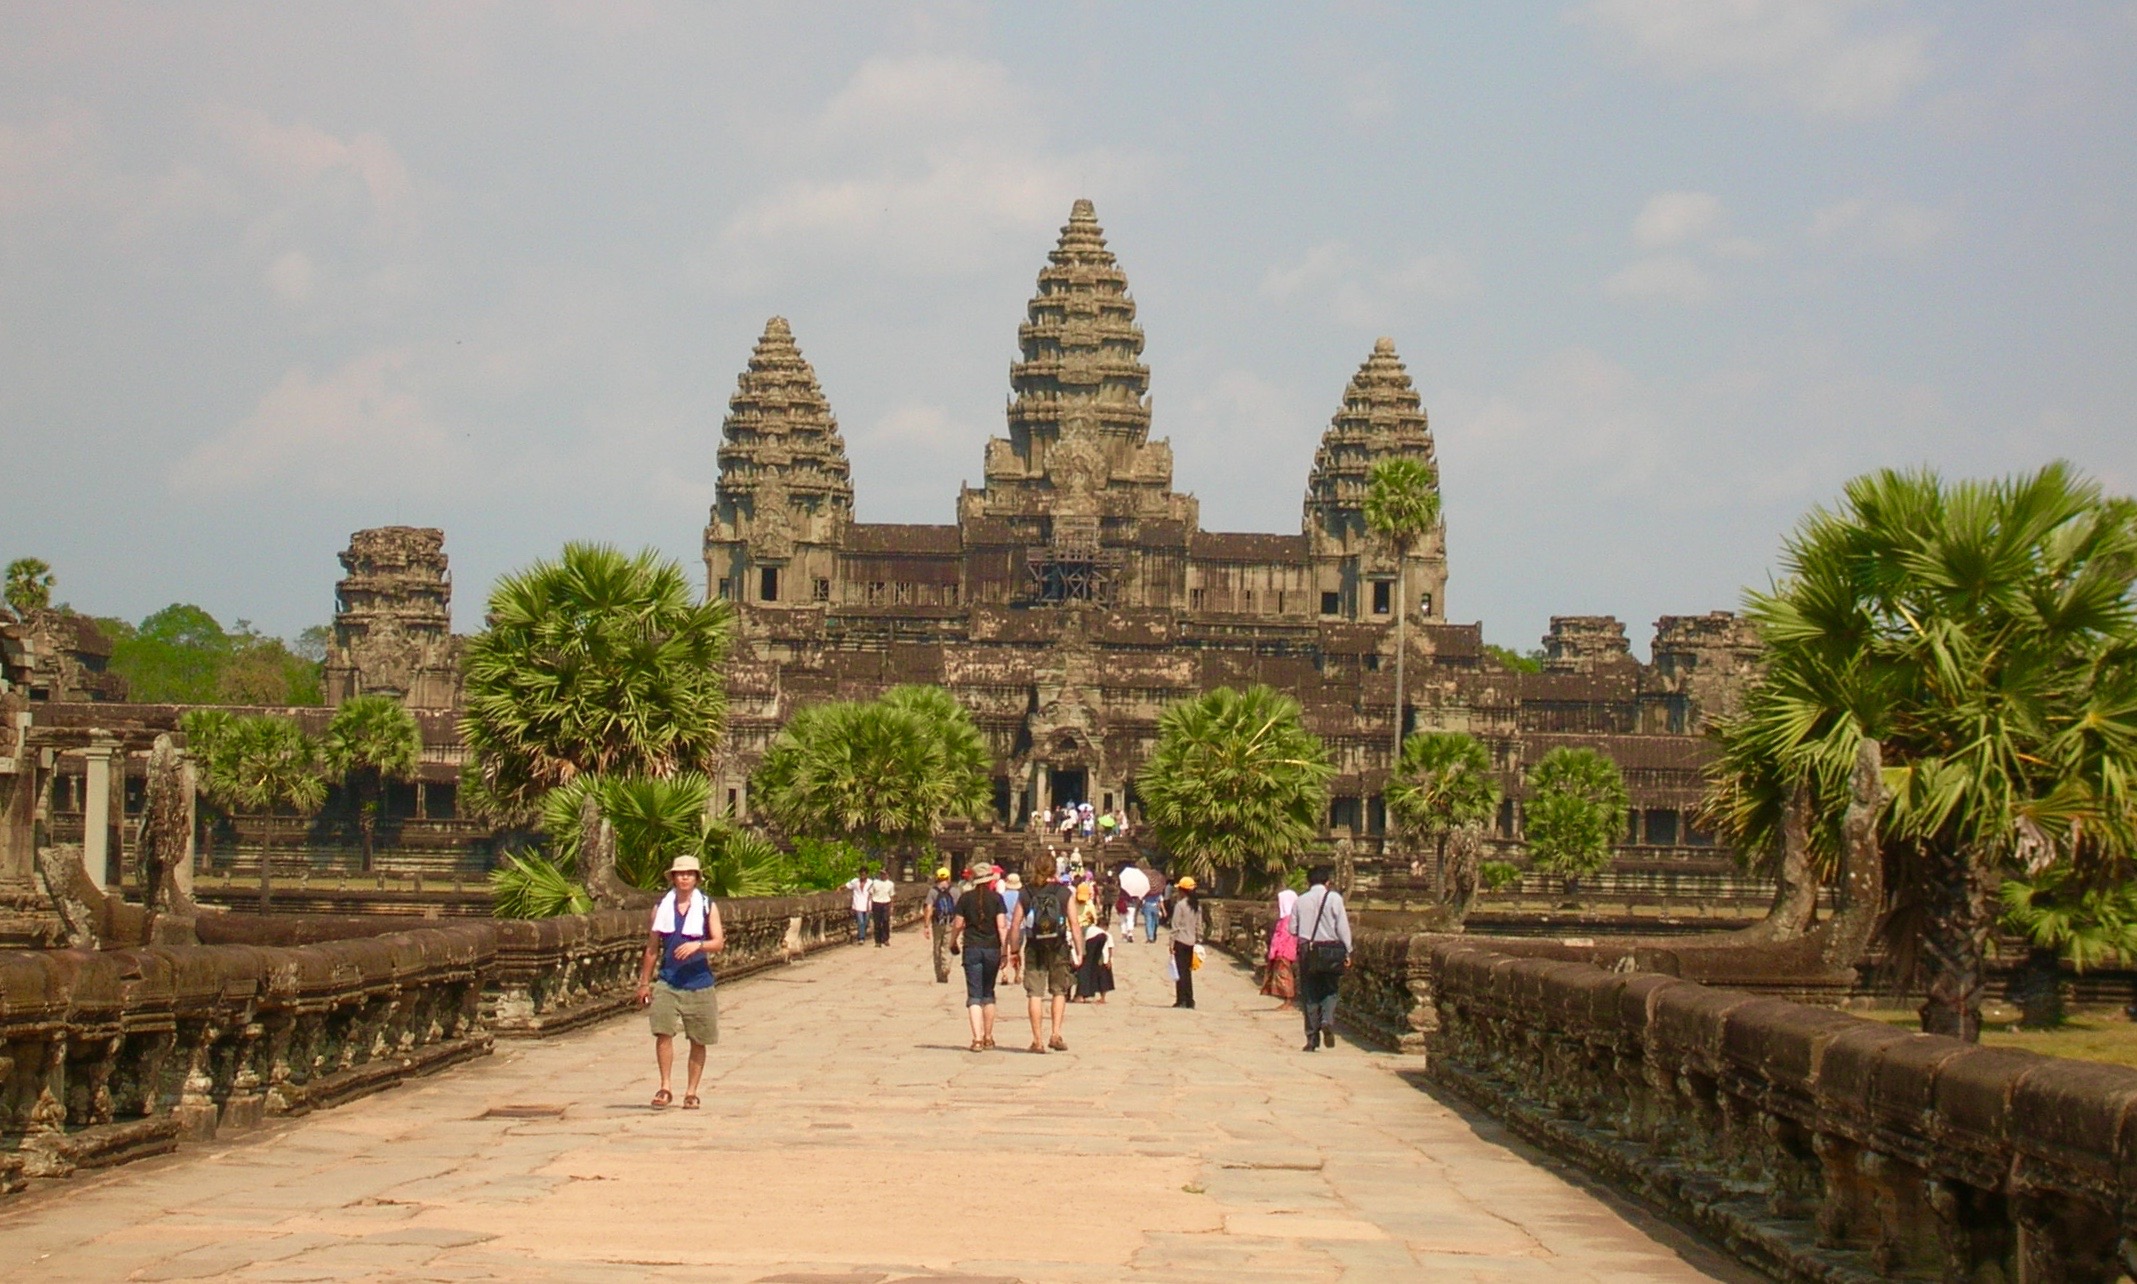 Angkor Wat - jewel of the Khmer temples and the world’s largest religious monument. Photo by Marla Norman.